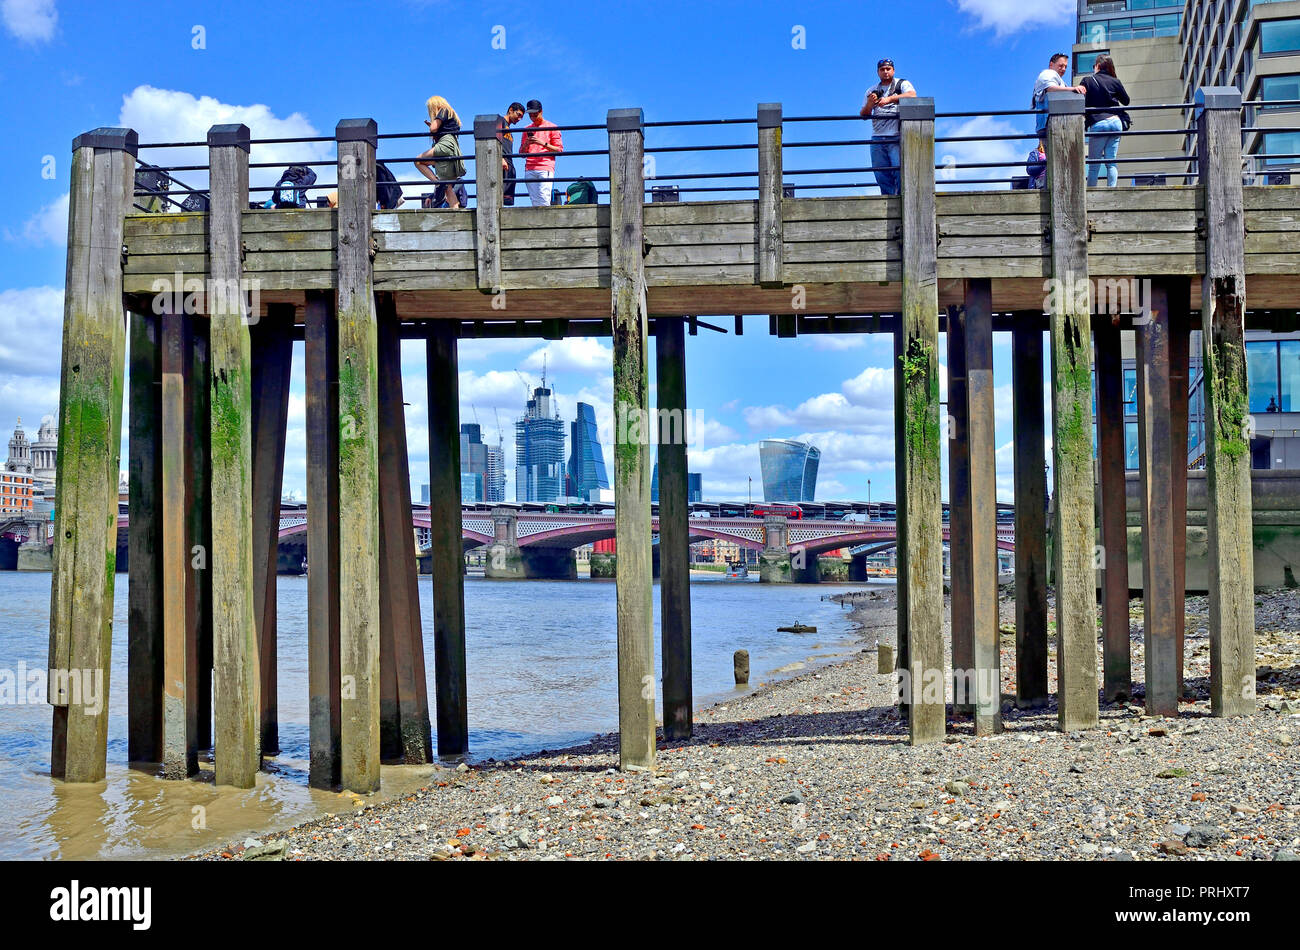 People on a wooden pier on Gabriel's Beach, River Thames at low tide. London, England, UK. Stock Photo